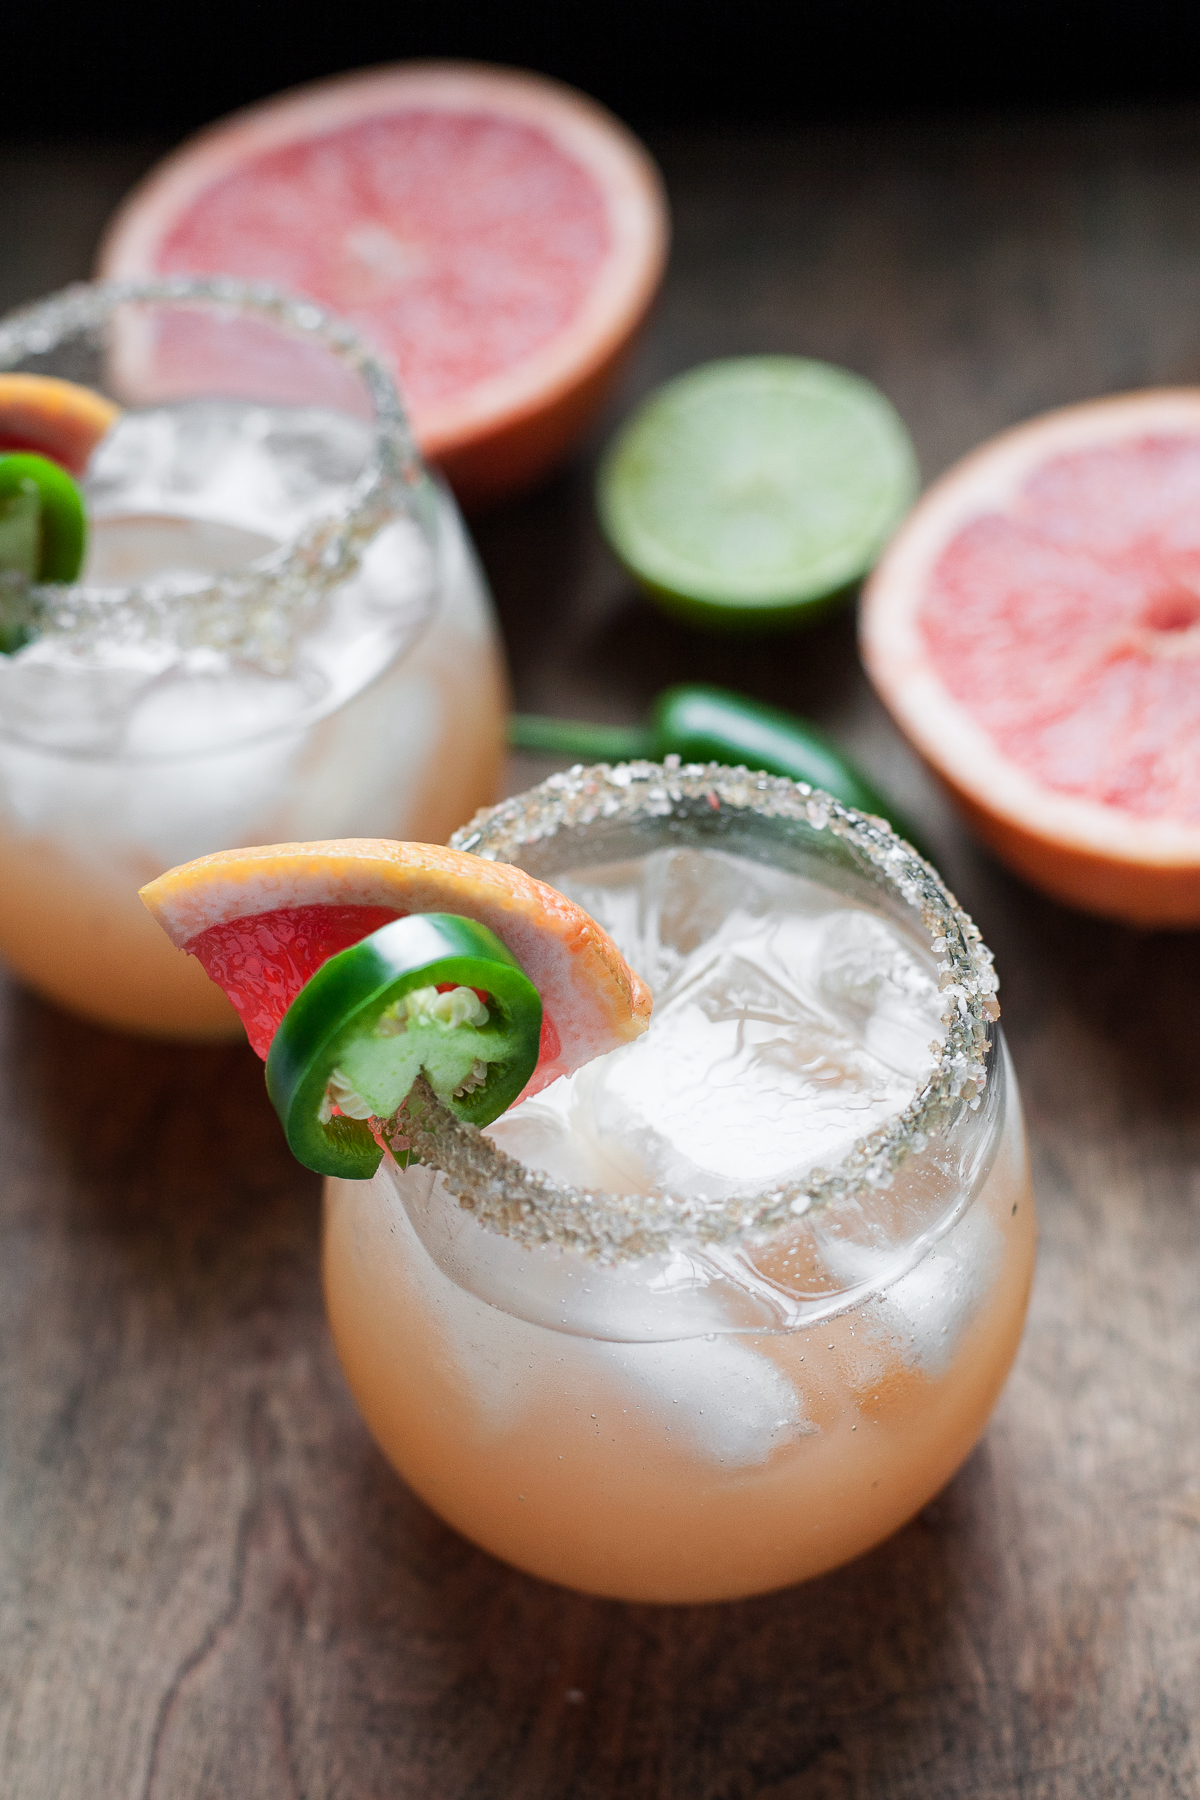 These grapefruit jalapeño margaritas are sweetened with honey and are perfect for Mother's Day, Cinco de mayo, or anytime!